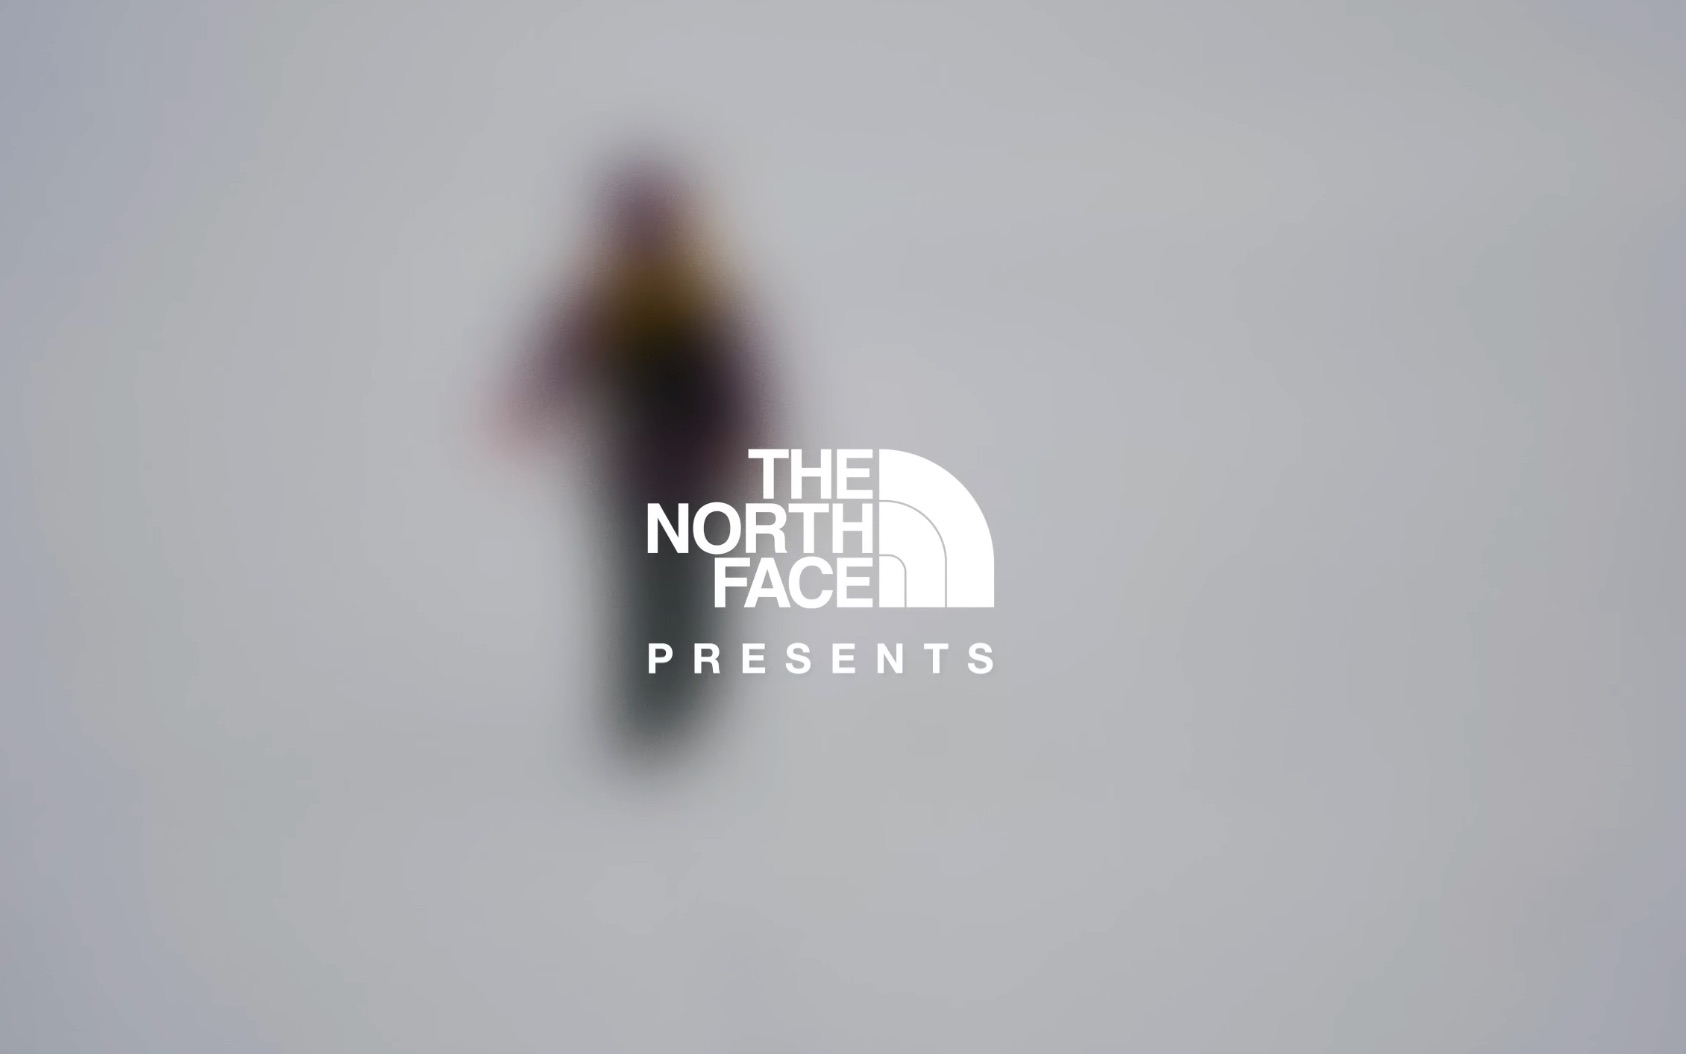 The North Face Presents- Beyond the Summit/北面广告/宣传/纪录片